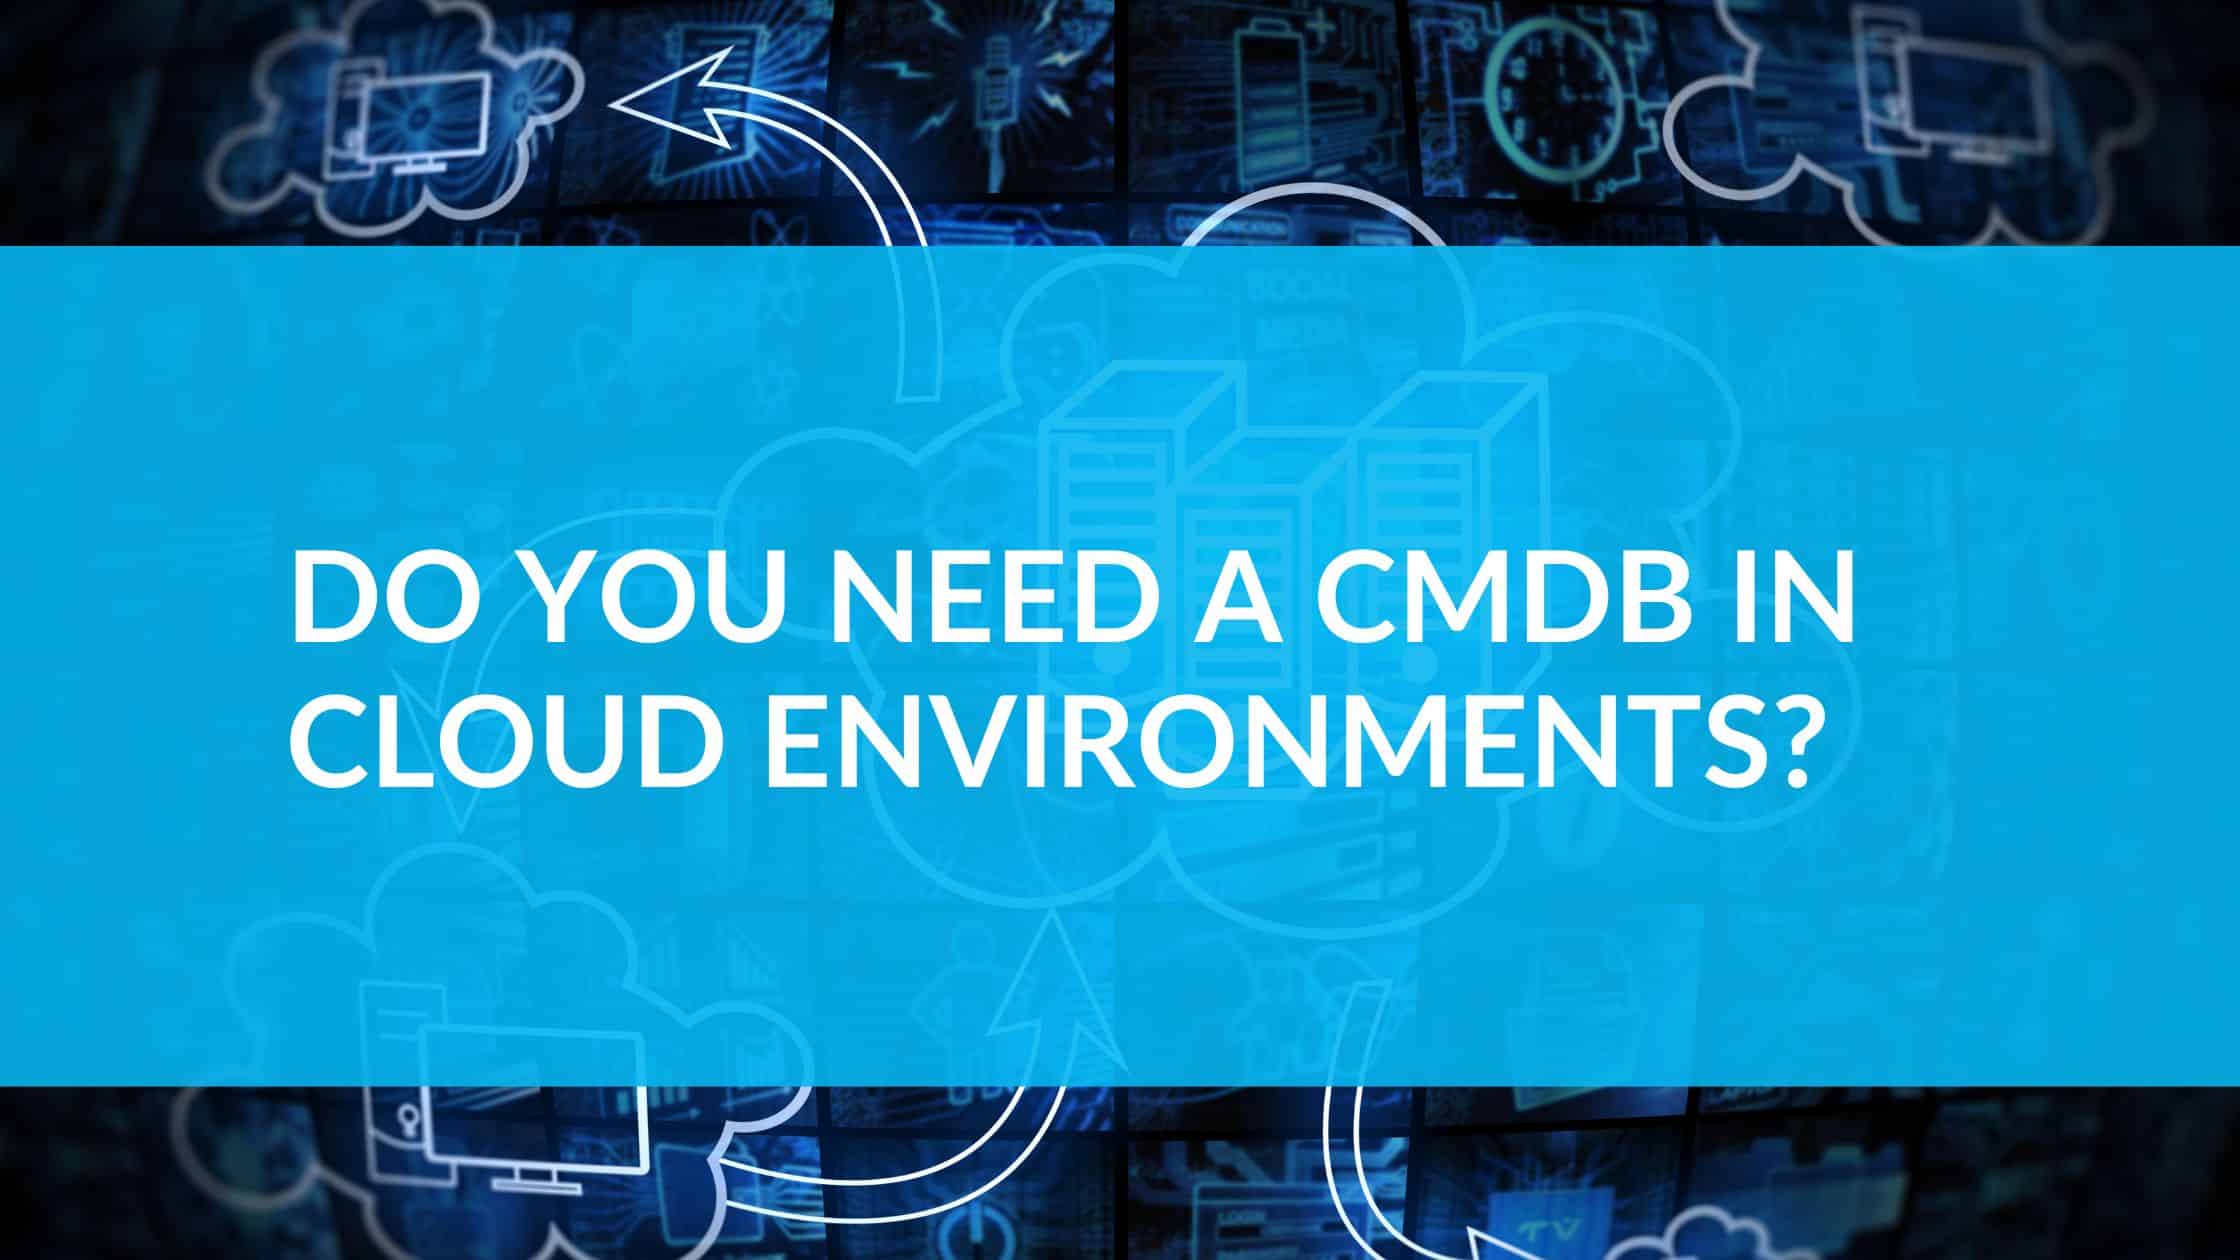 Do you need a CMDB in cloud environments?